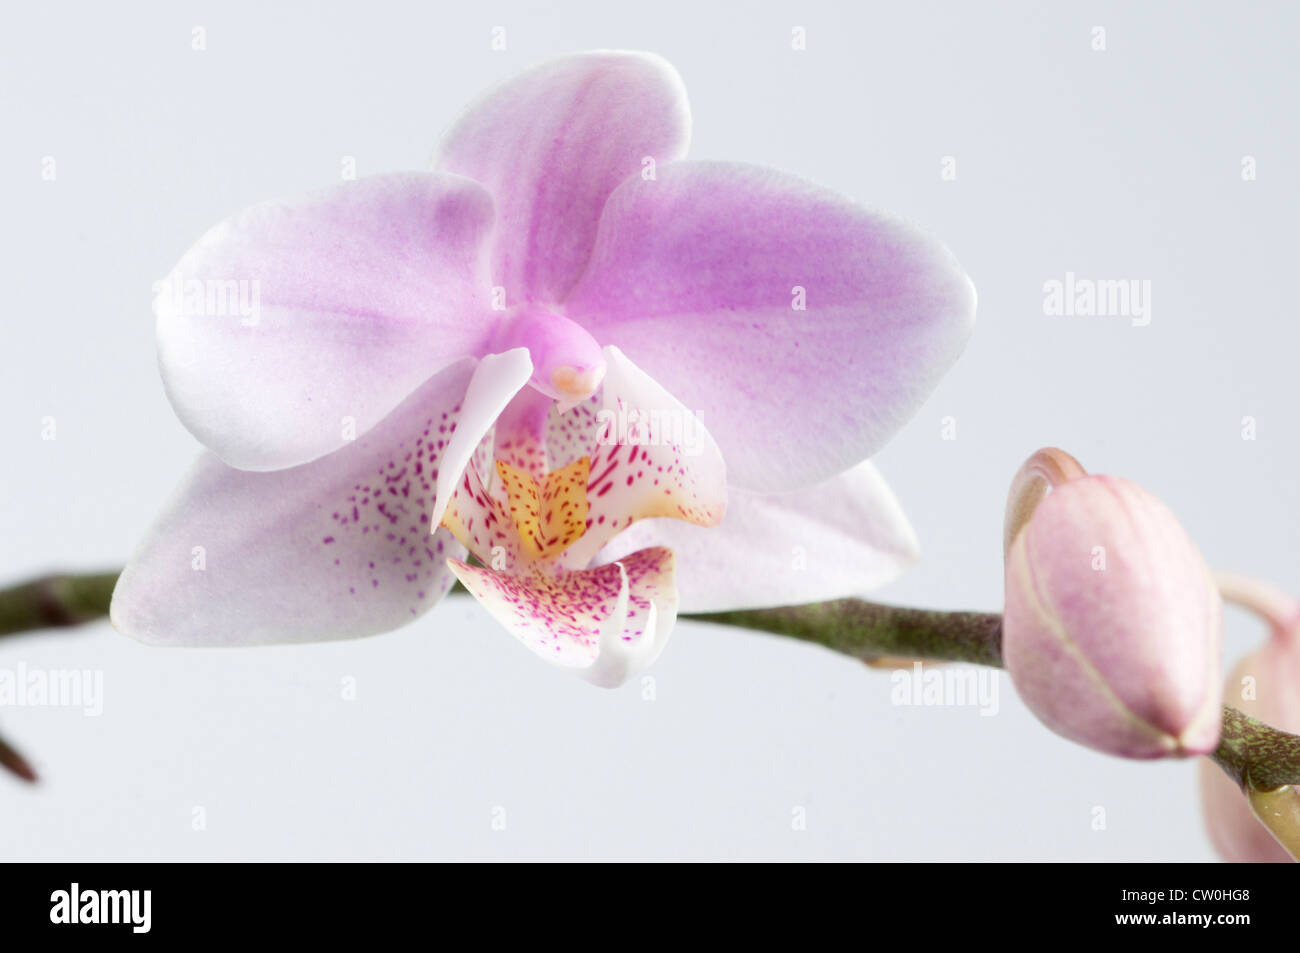 Rosa phalaenopsis orchid flower close-up, messa a fuoco locale Foto Stock